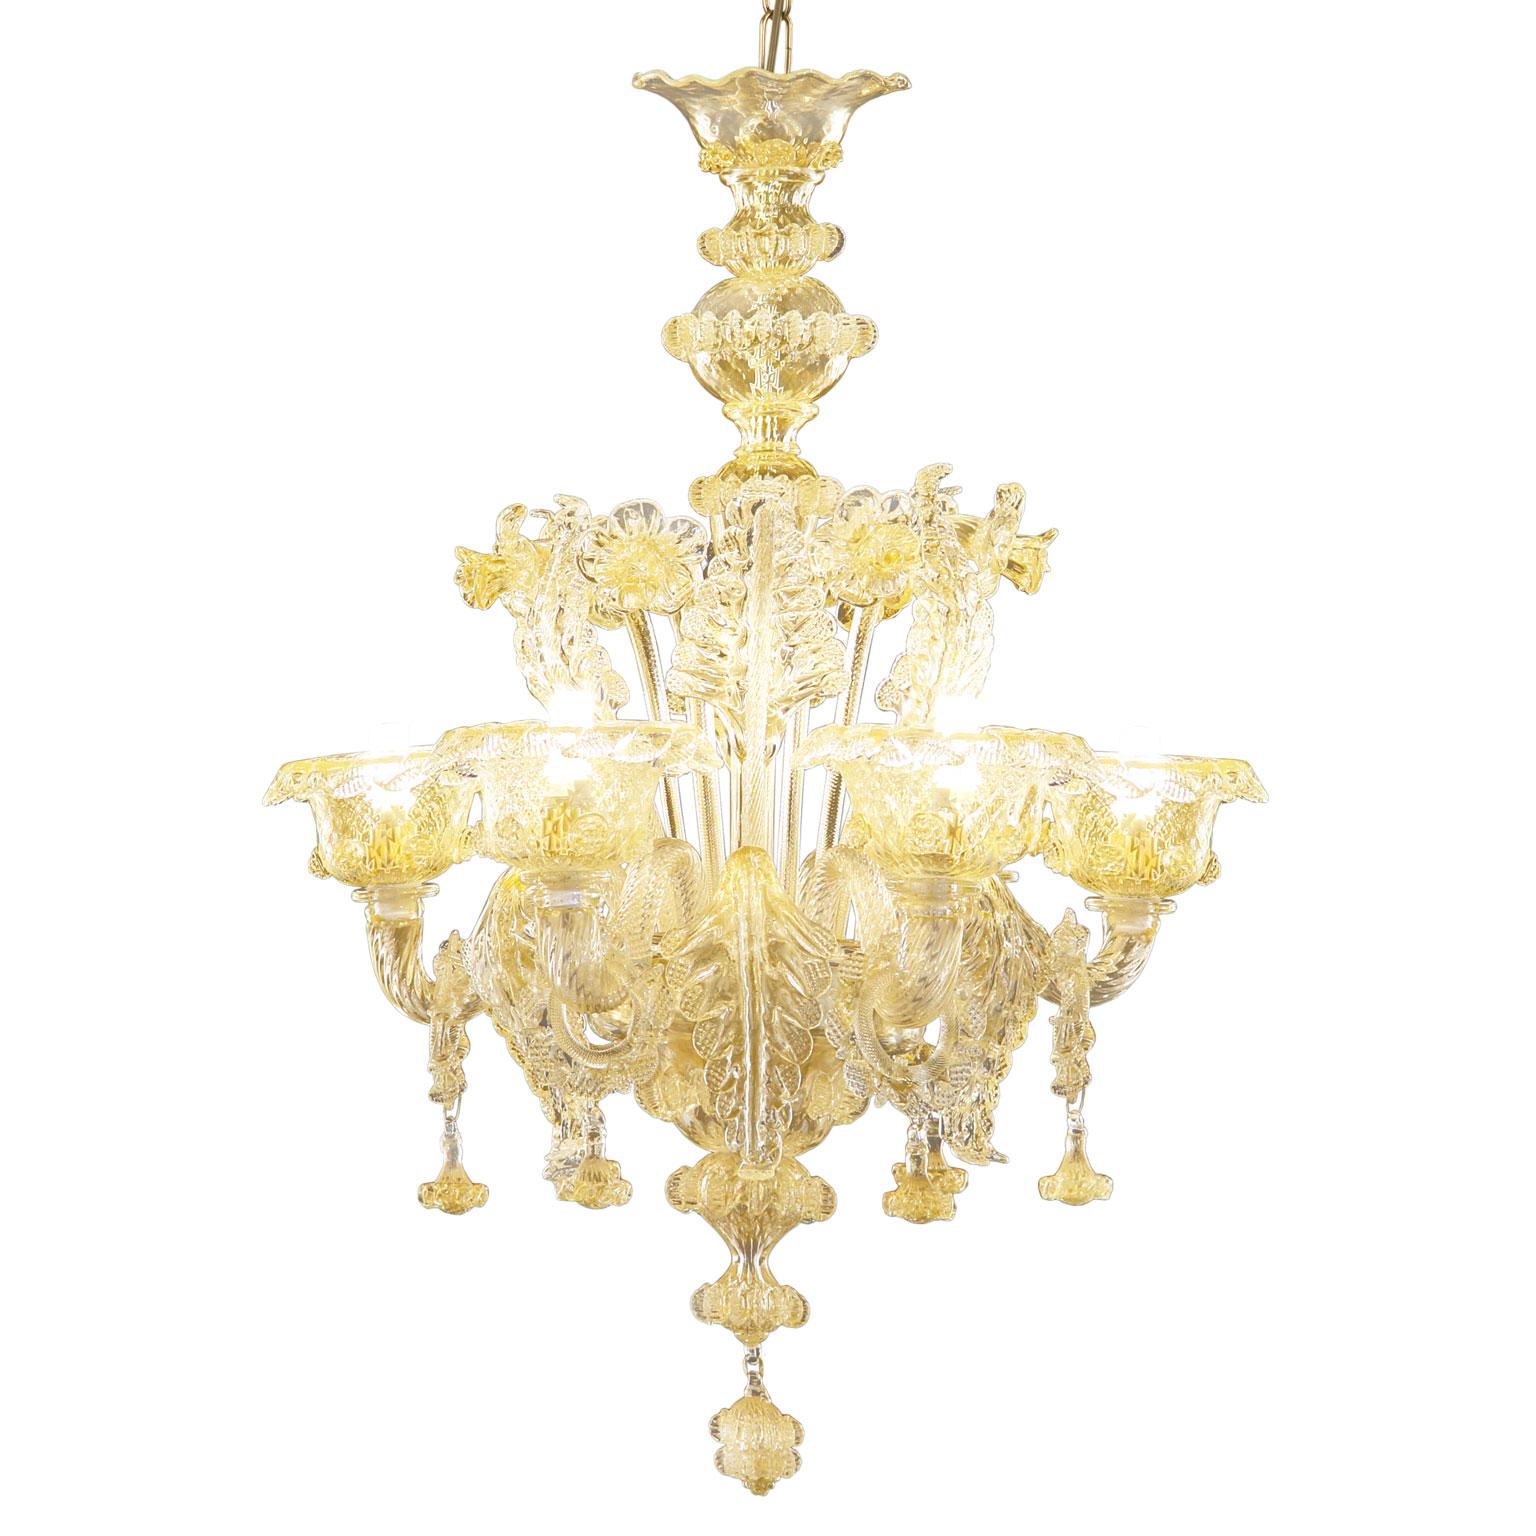 The peculiar characteristic of the Galliano lighting collection is the richness of its decorations.
This artistic luxury glass chandelier has 6-light, is handmade in gold glass.
Galliano is our tribute to the authentic Murano glass tradition. It